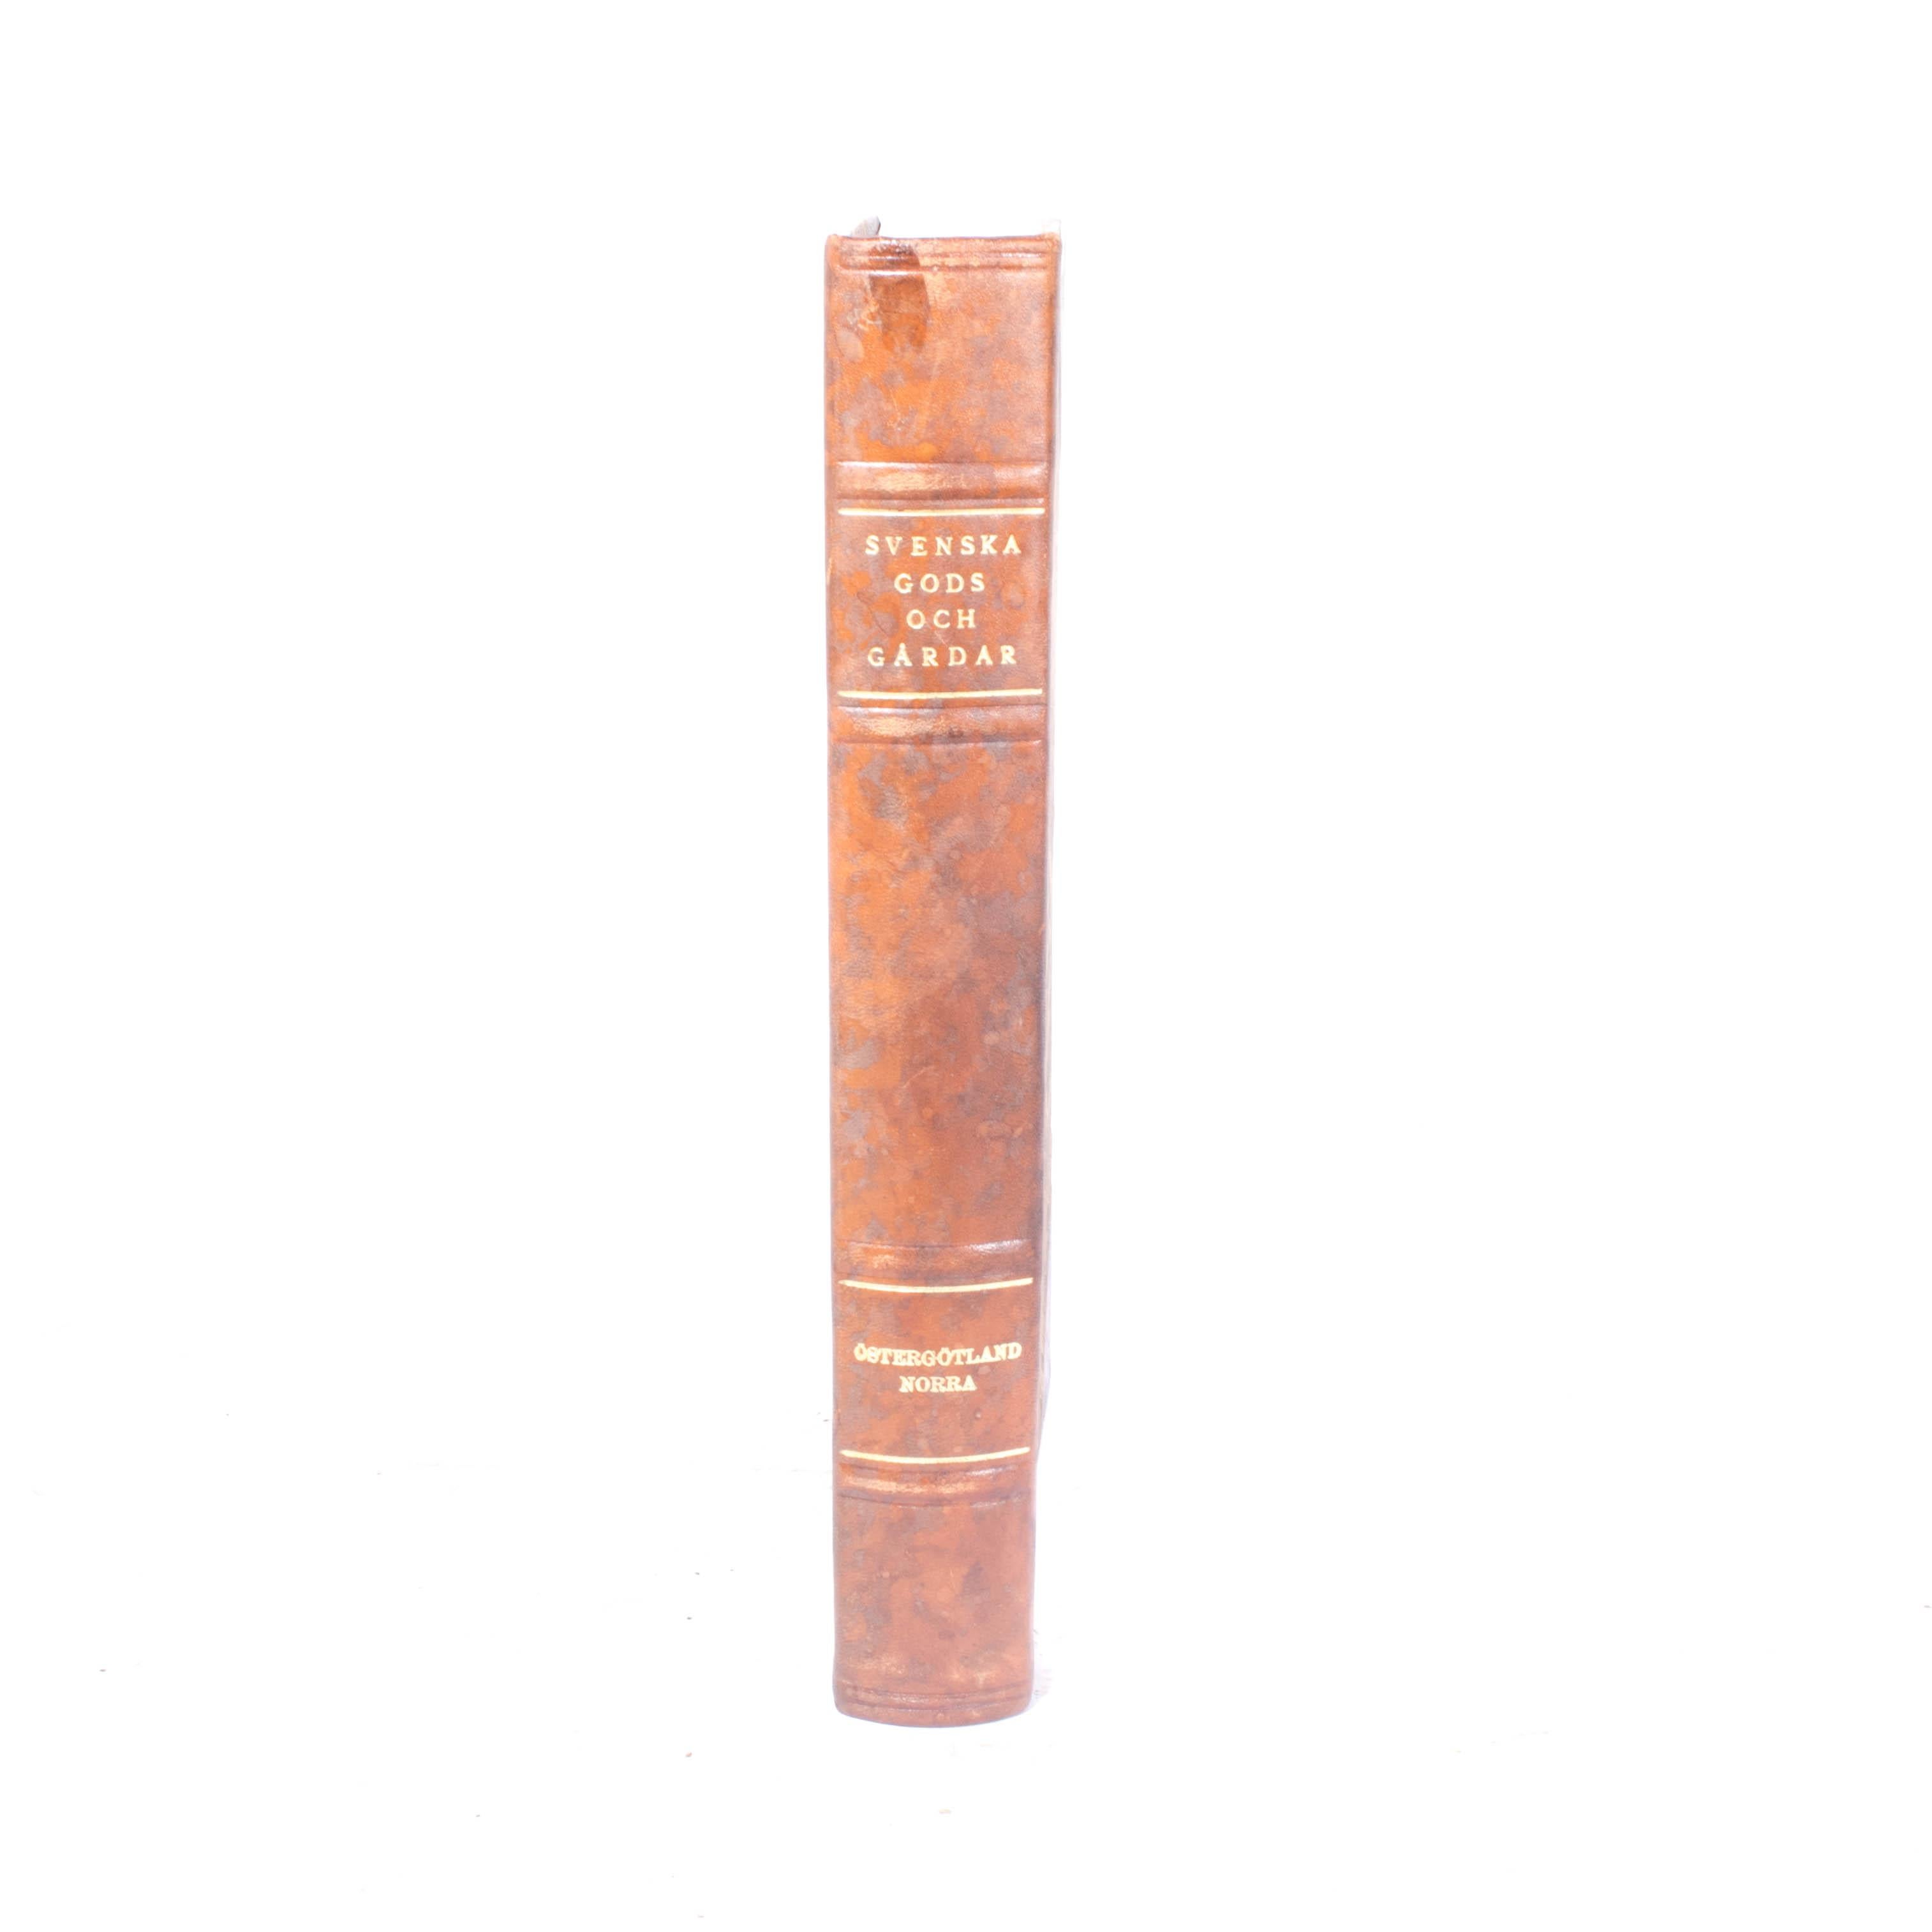 20th Century Antique Leather-Bound Books from Sweden